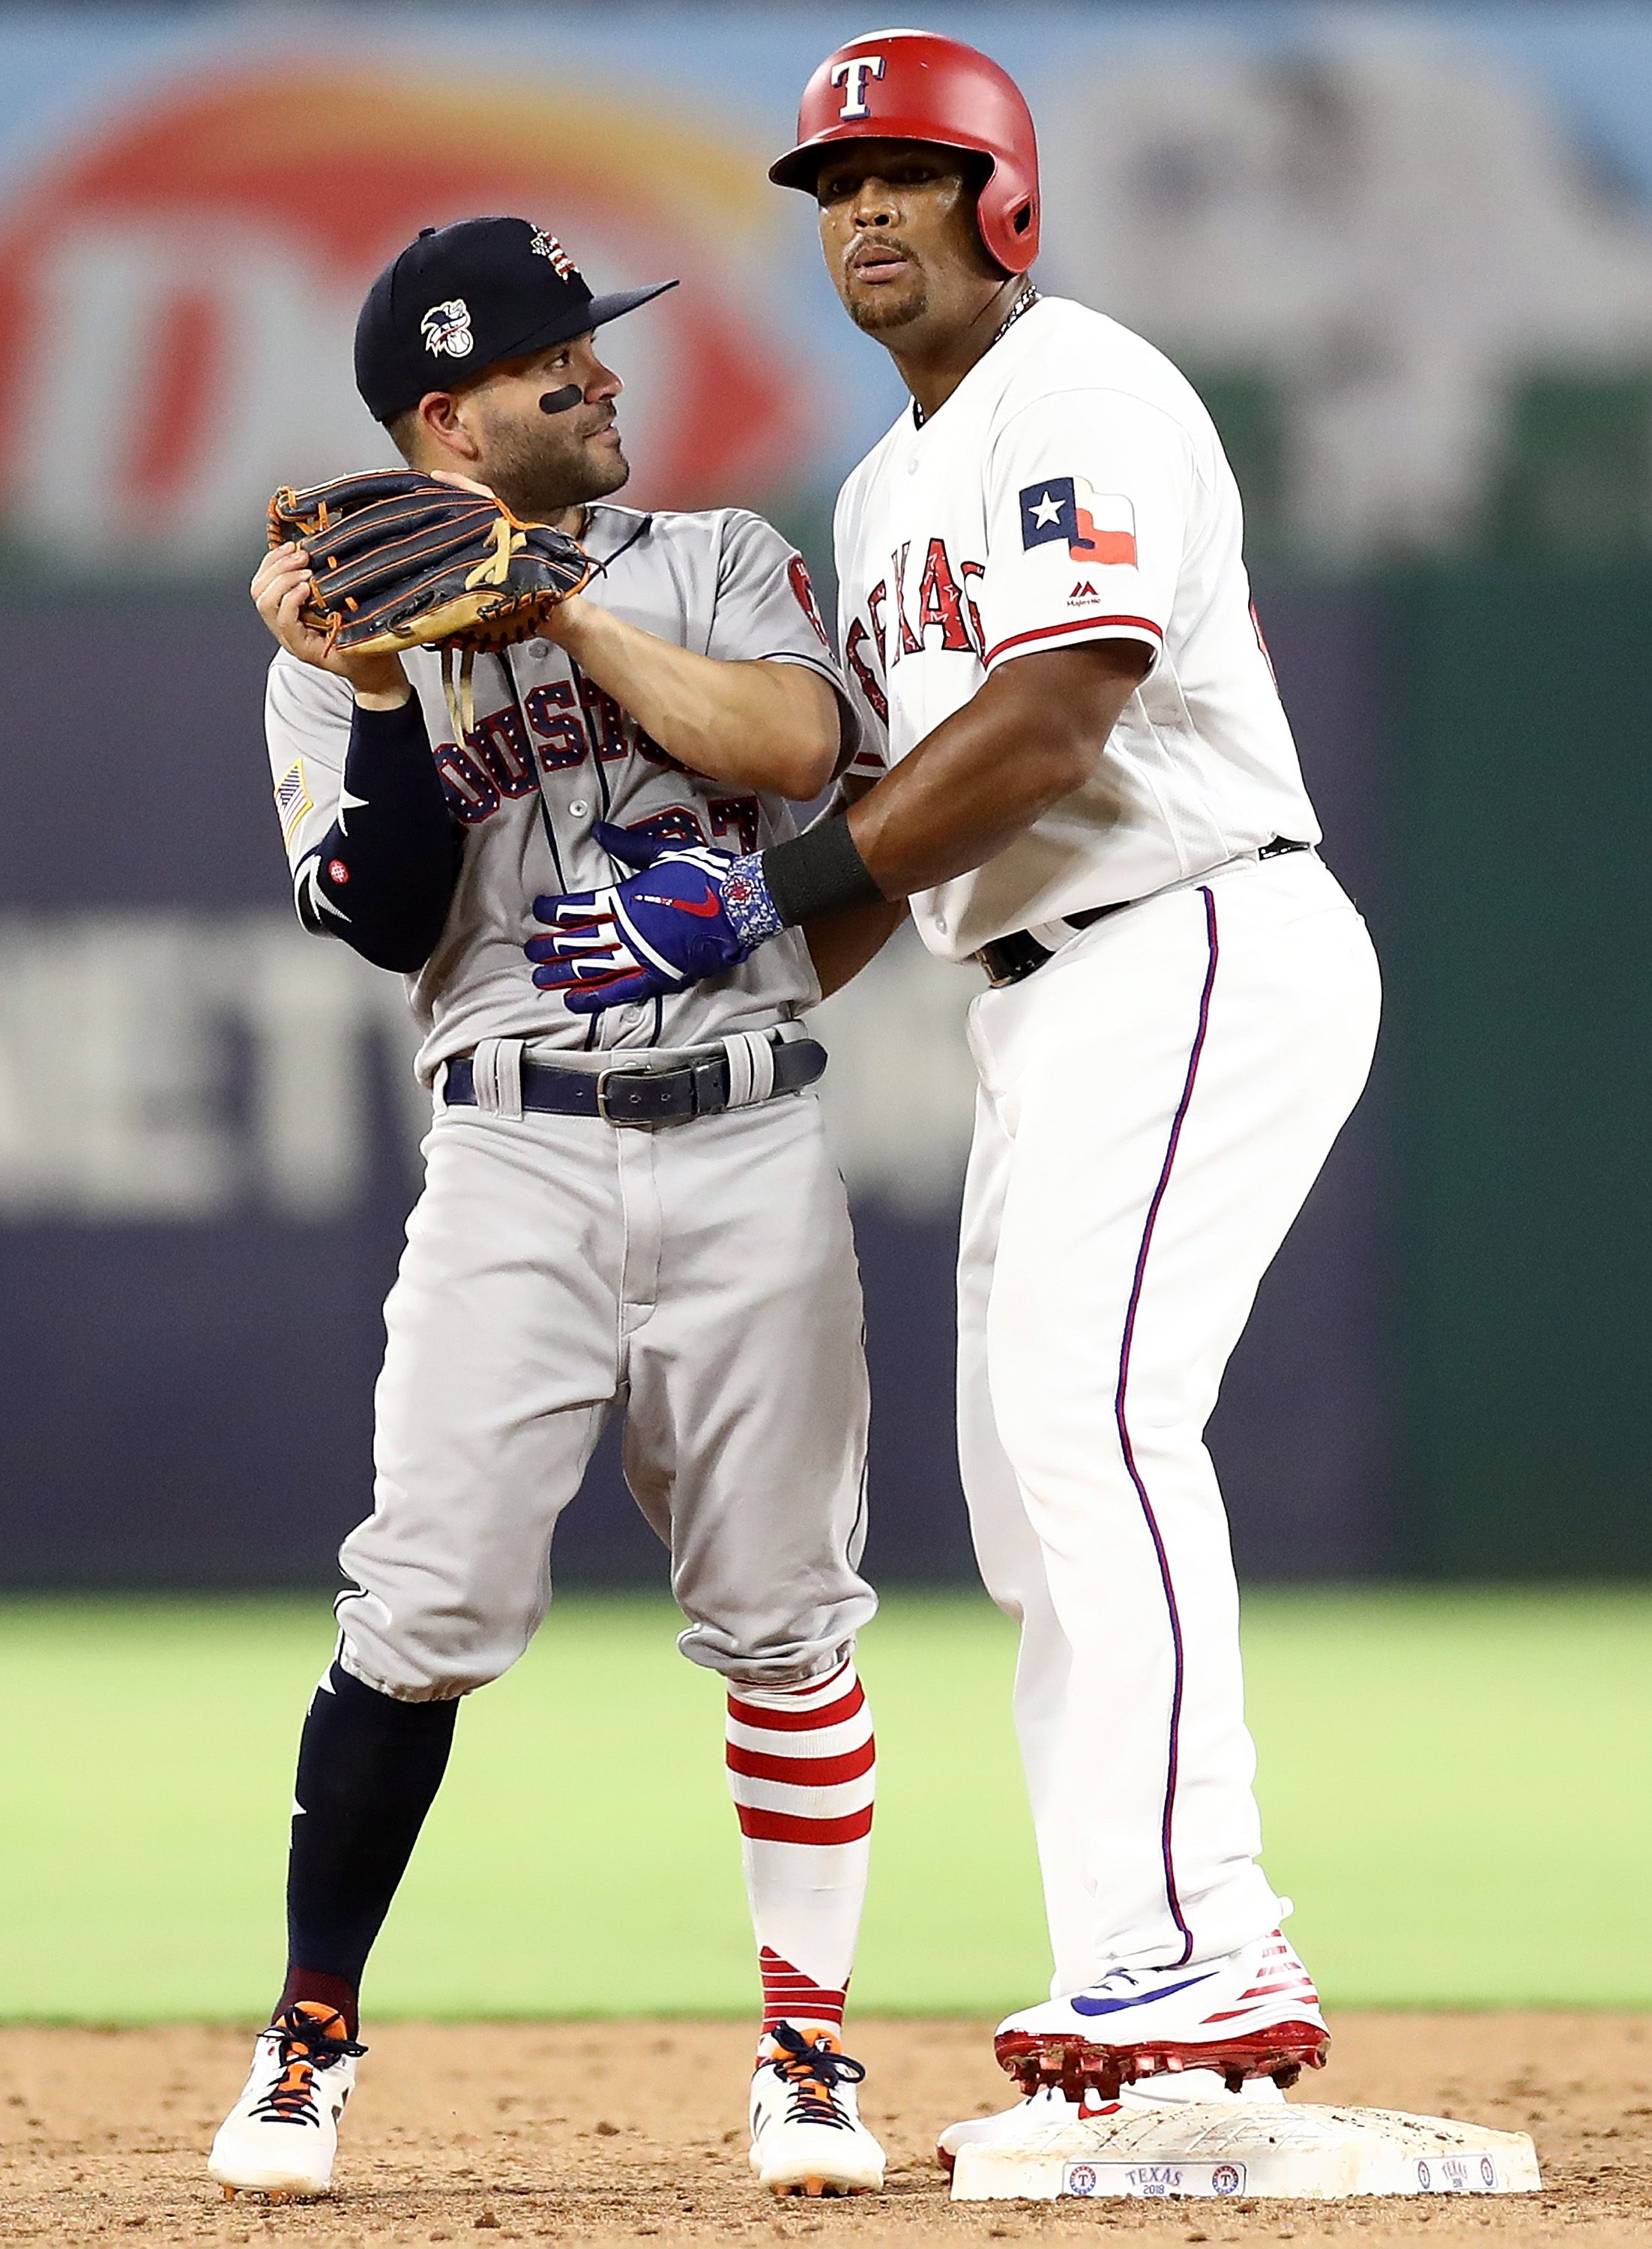 Photos of Jose Altuve looking small no laughing matter as Astros